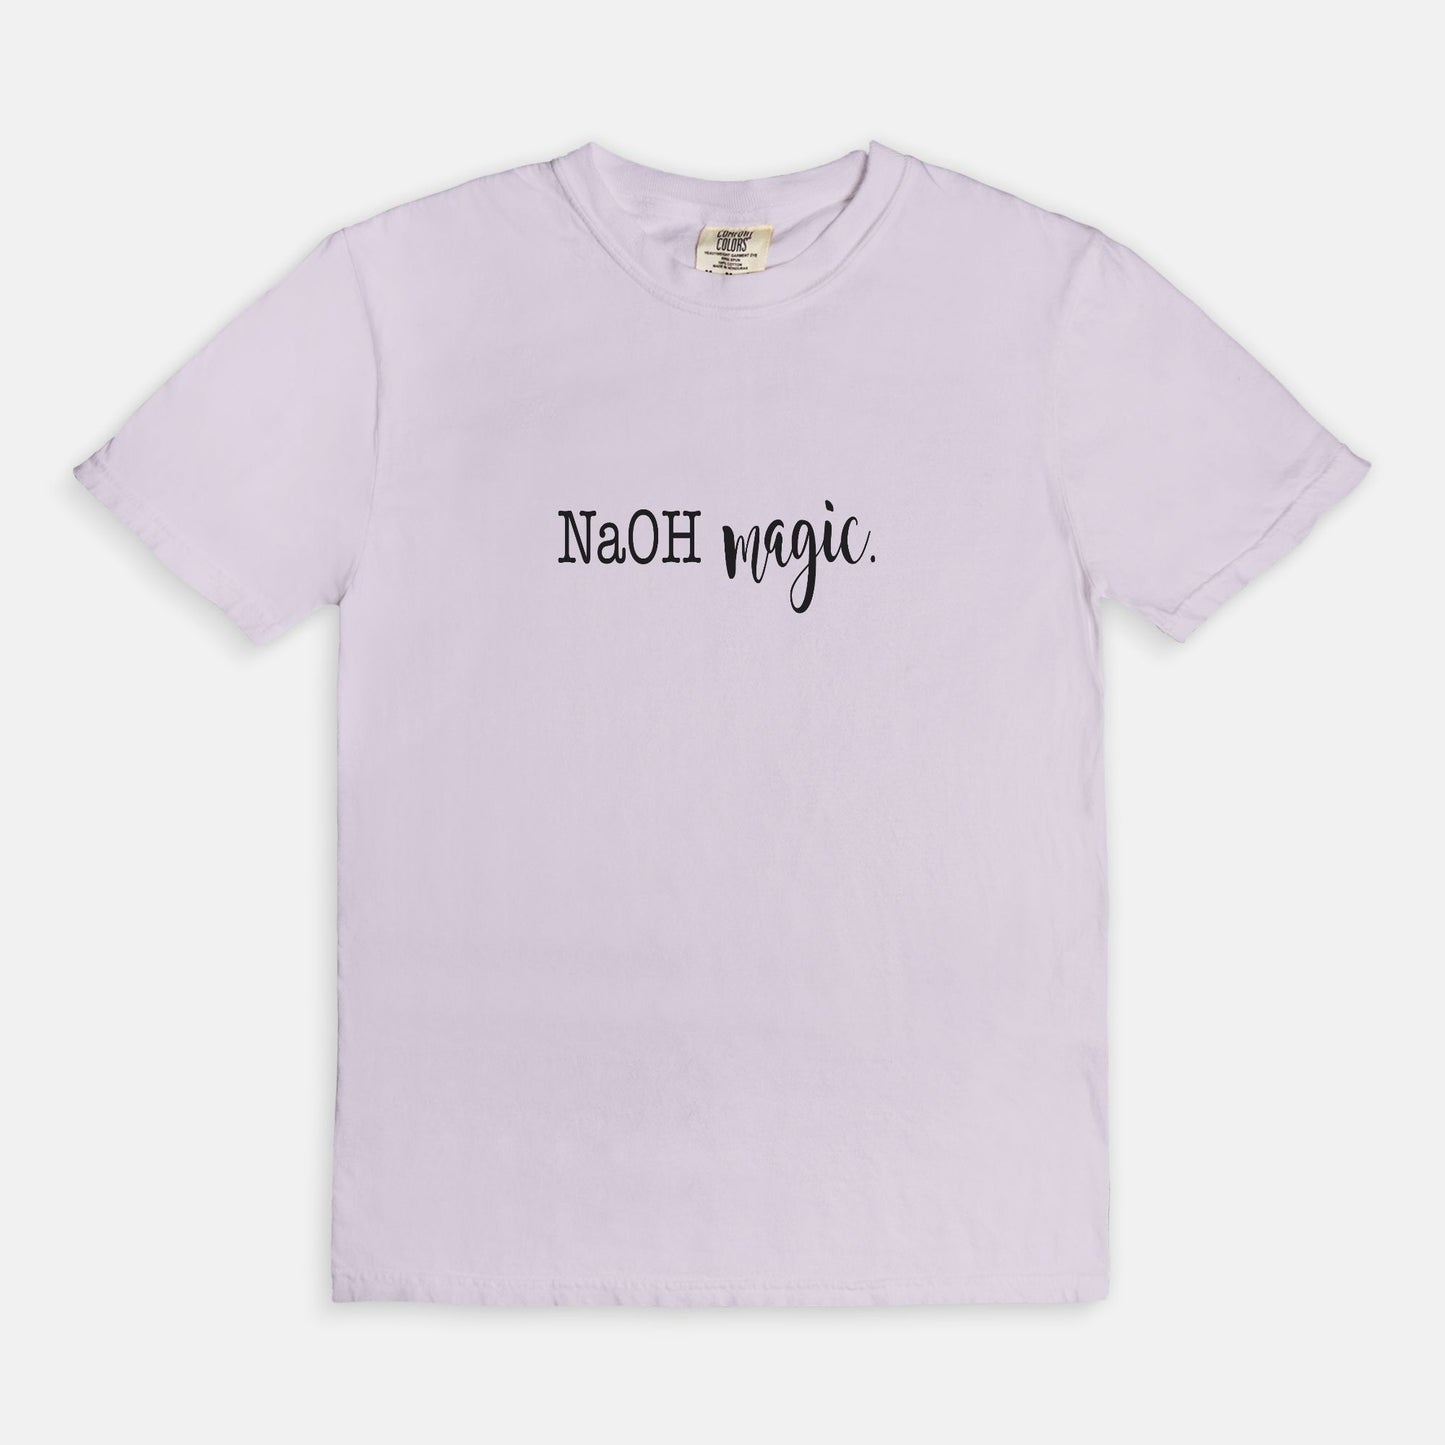 Know Magic Soap Makers Tee by Sorcery Soap + Hocus Pocus Craft